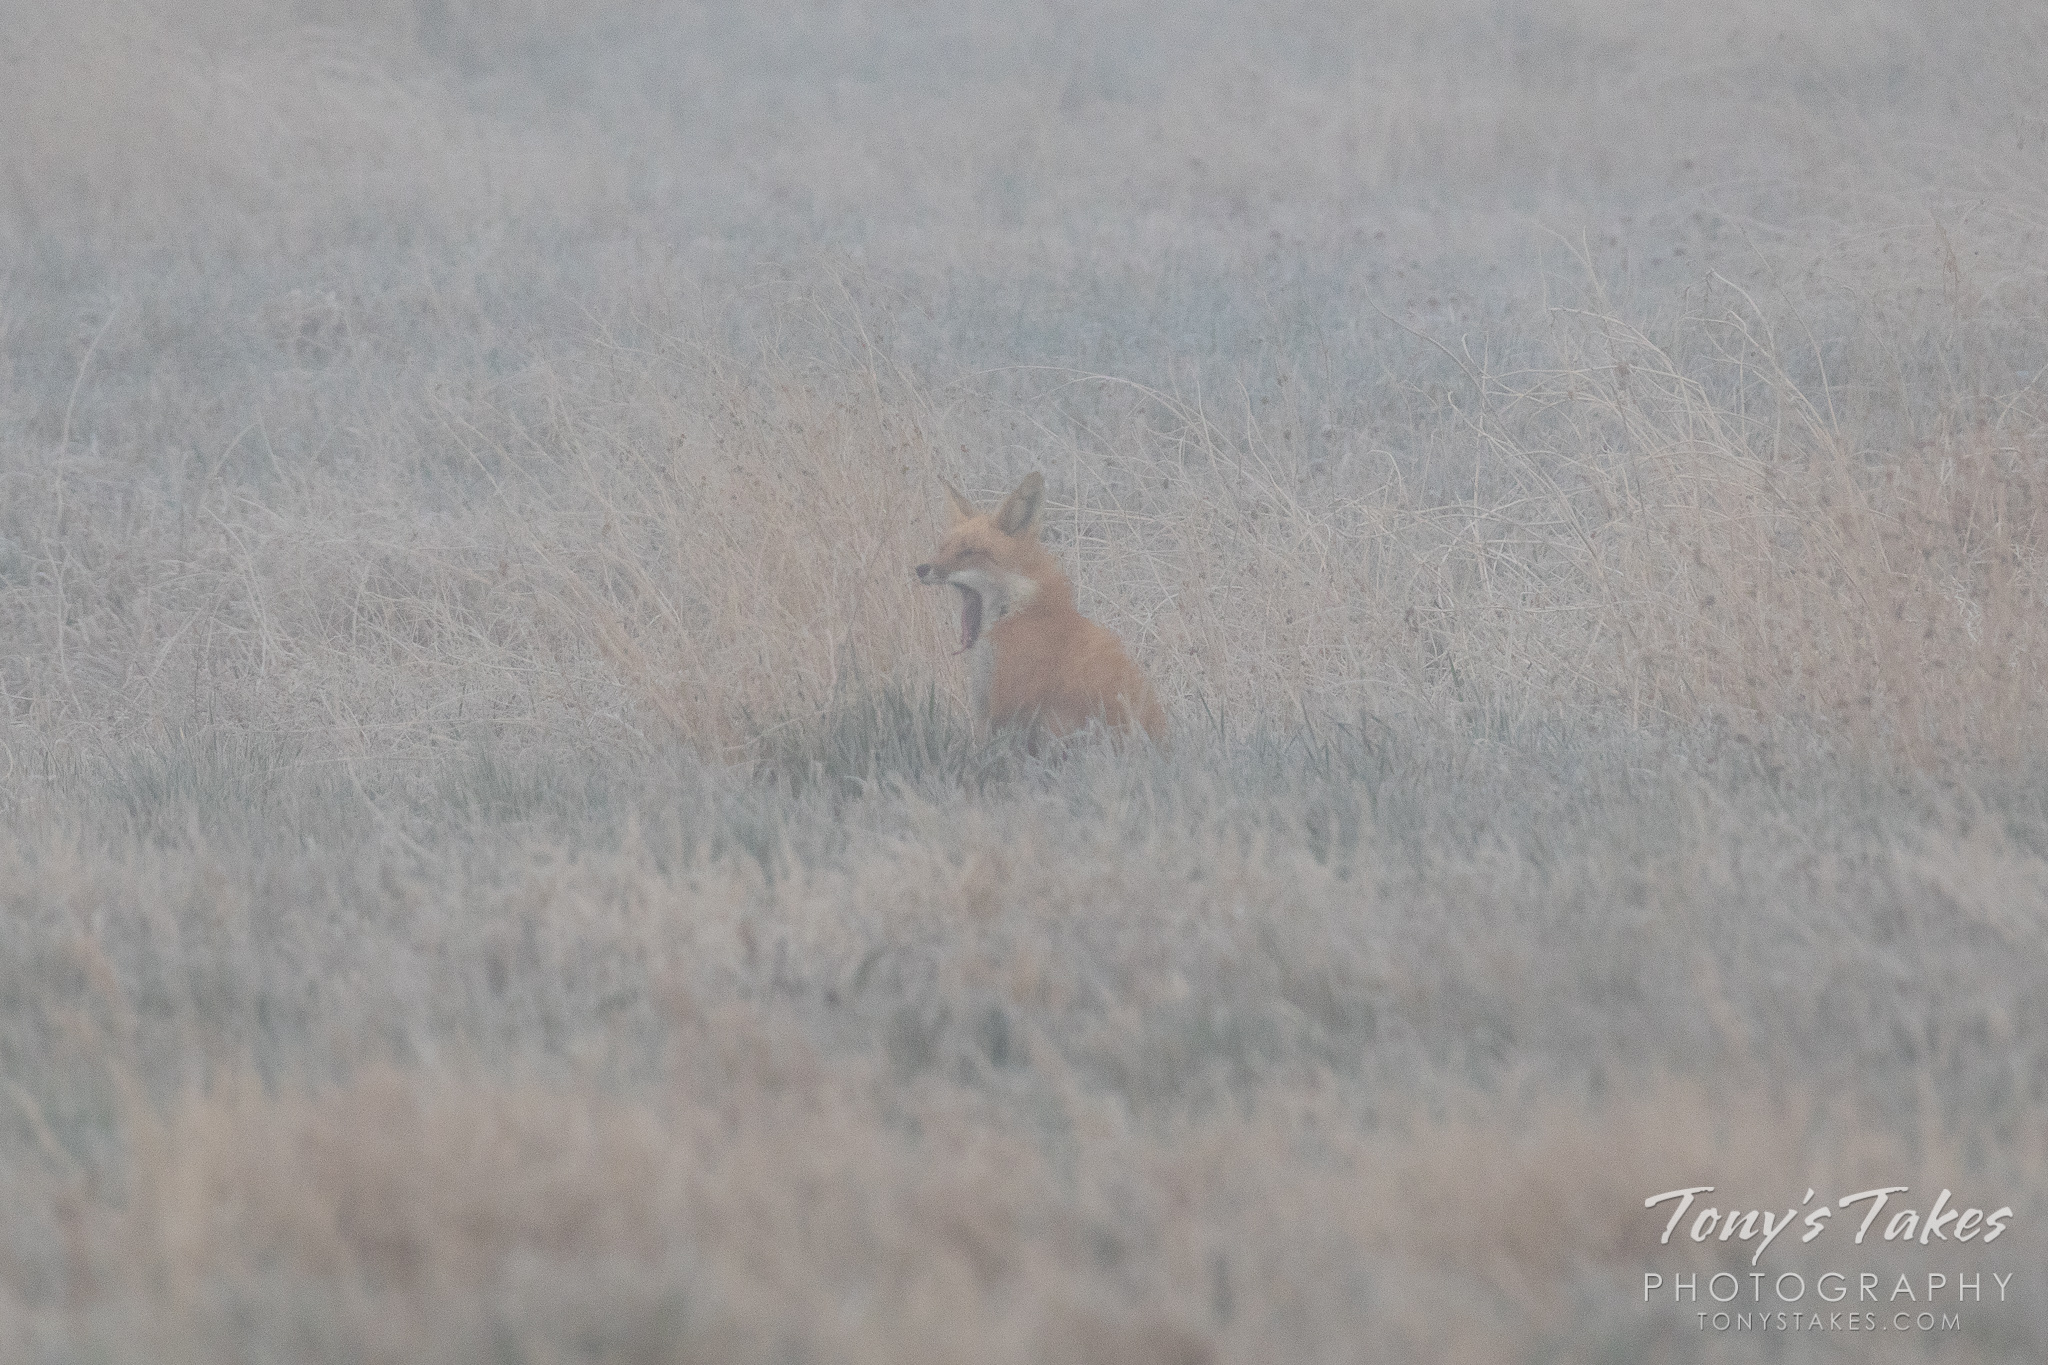 A red fox hanging out on a foggy morning on the Colorado plains. (© Tony’s Takes)